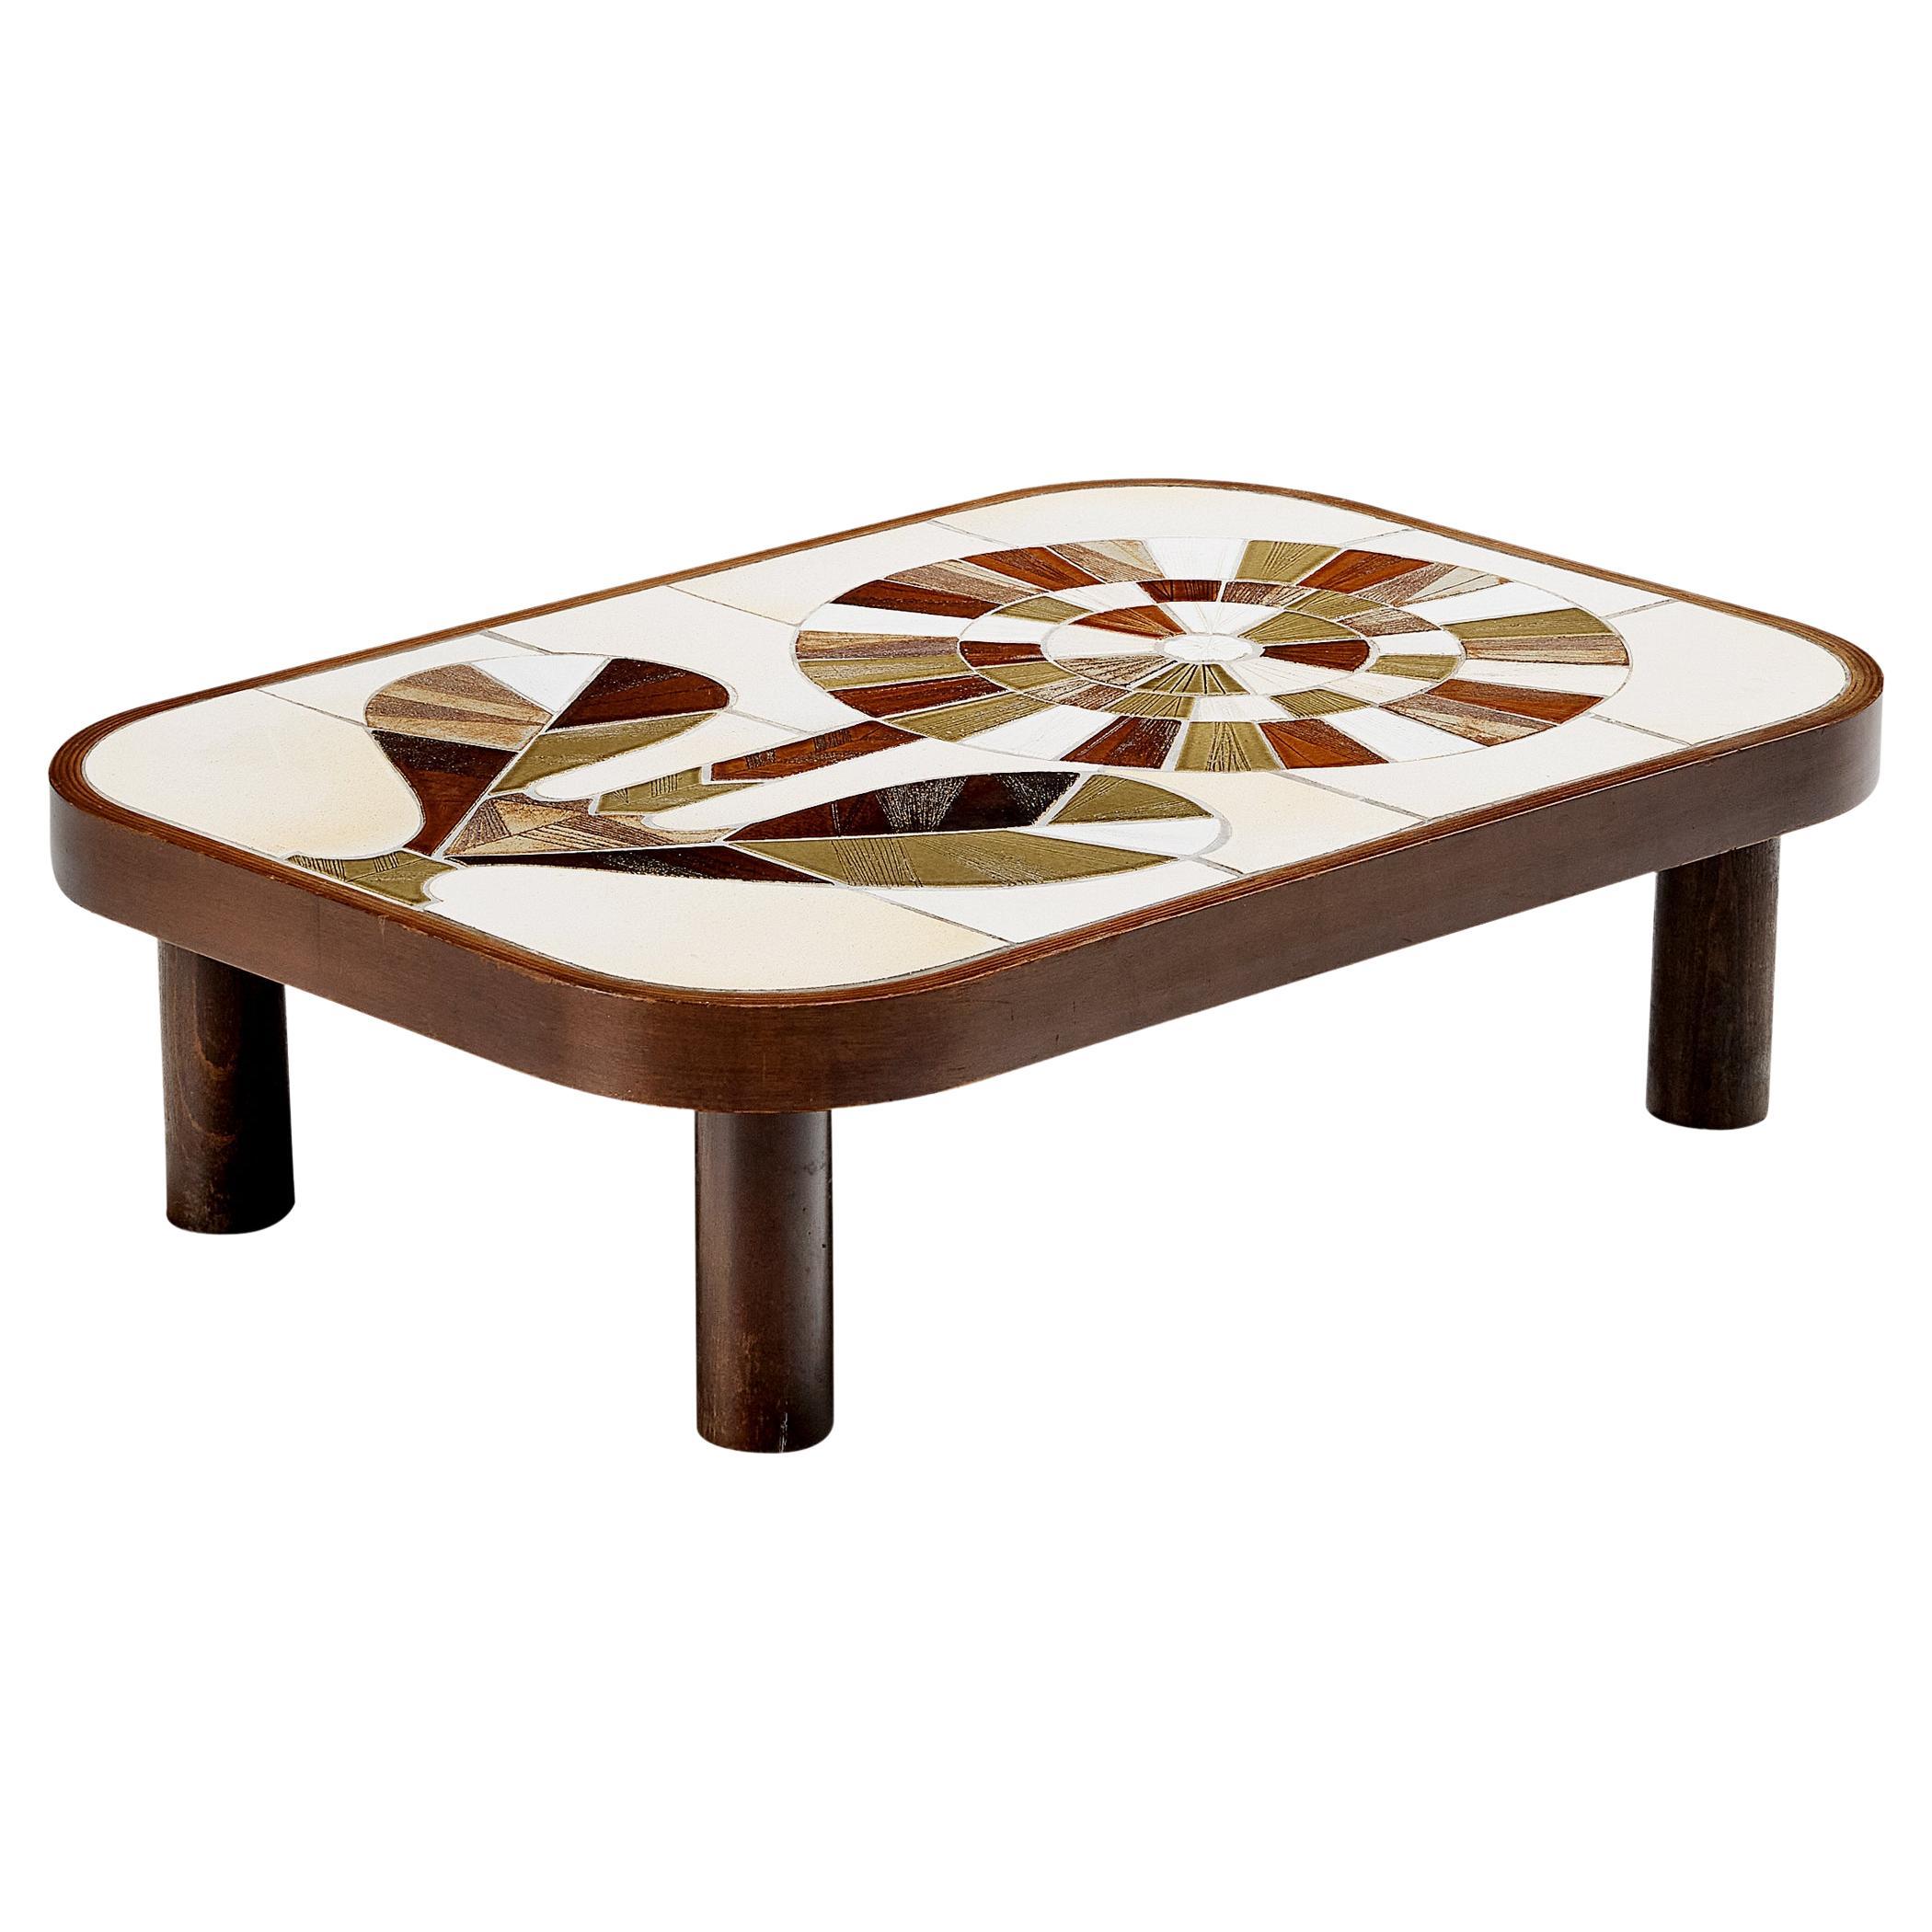 Roger Capron Coffee Table in Ceramic with Floral Motif 